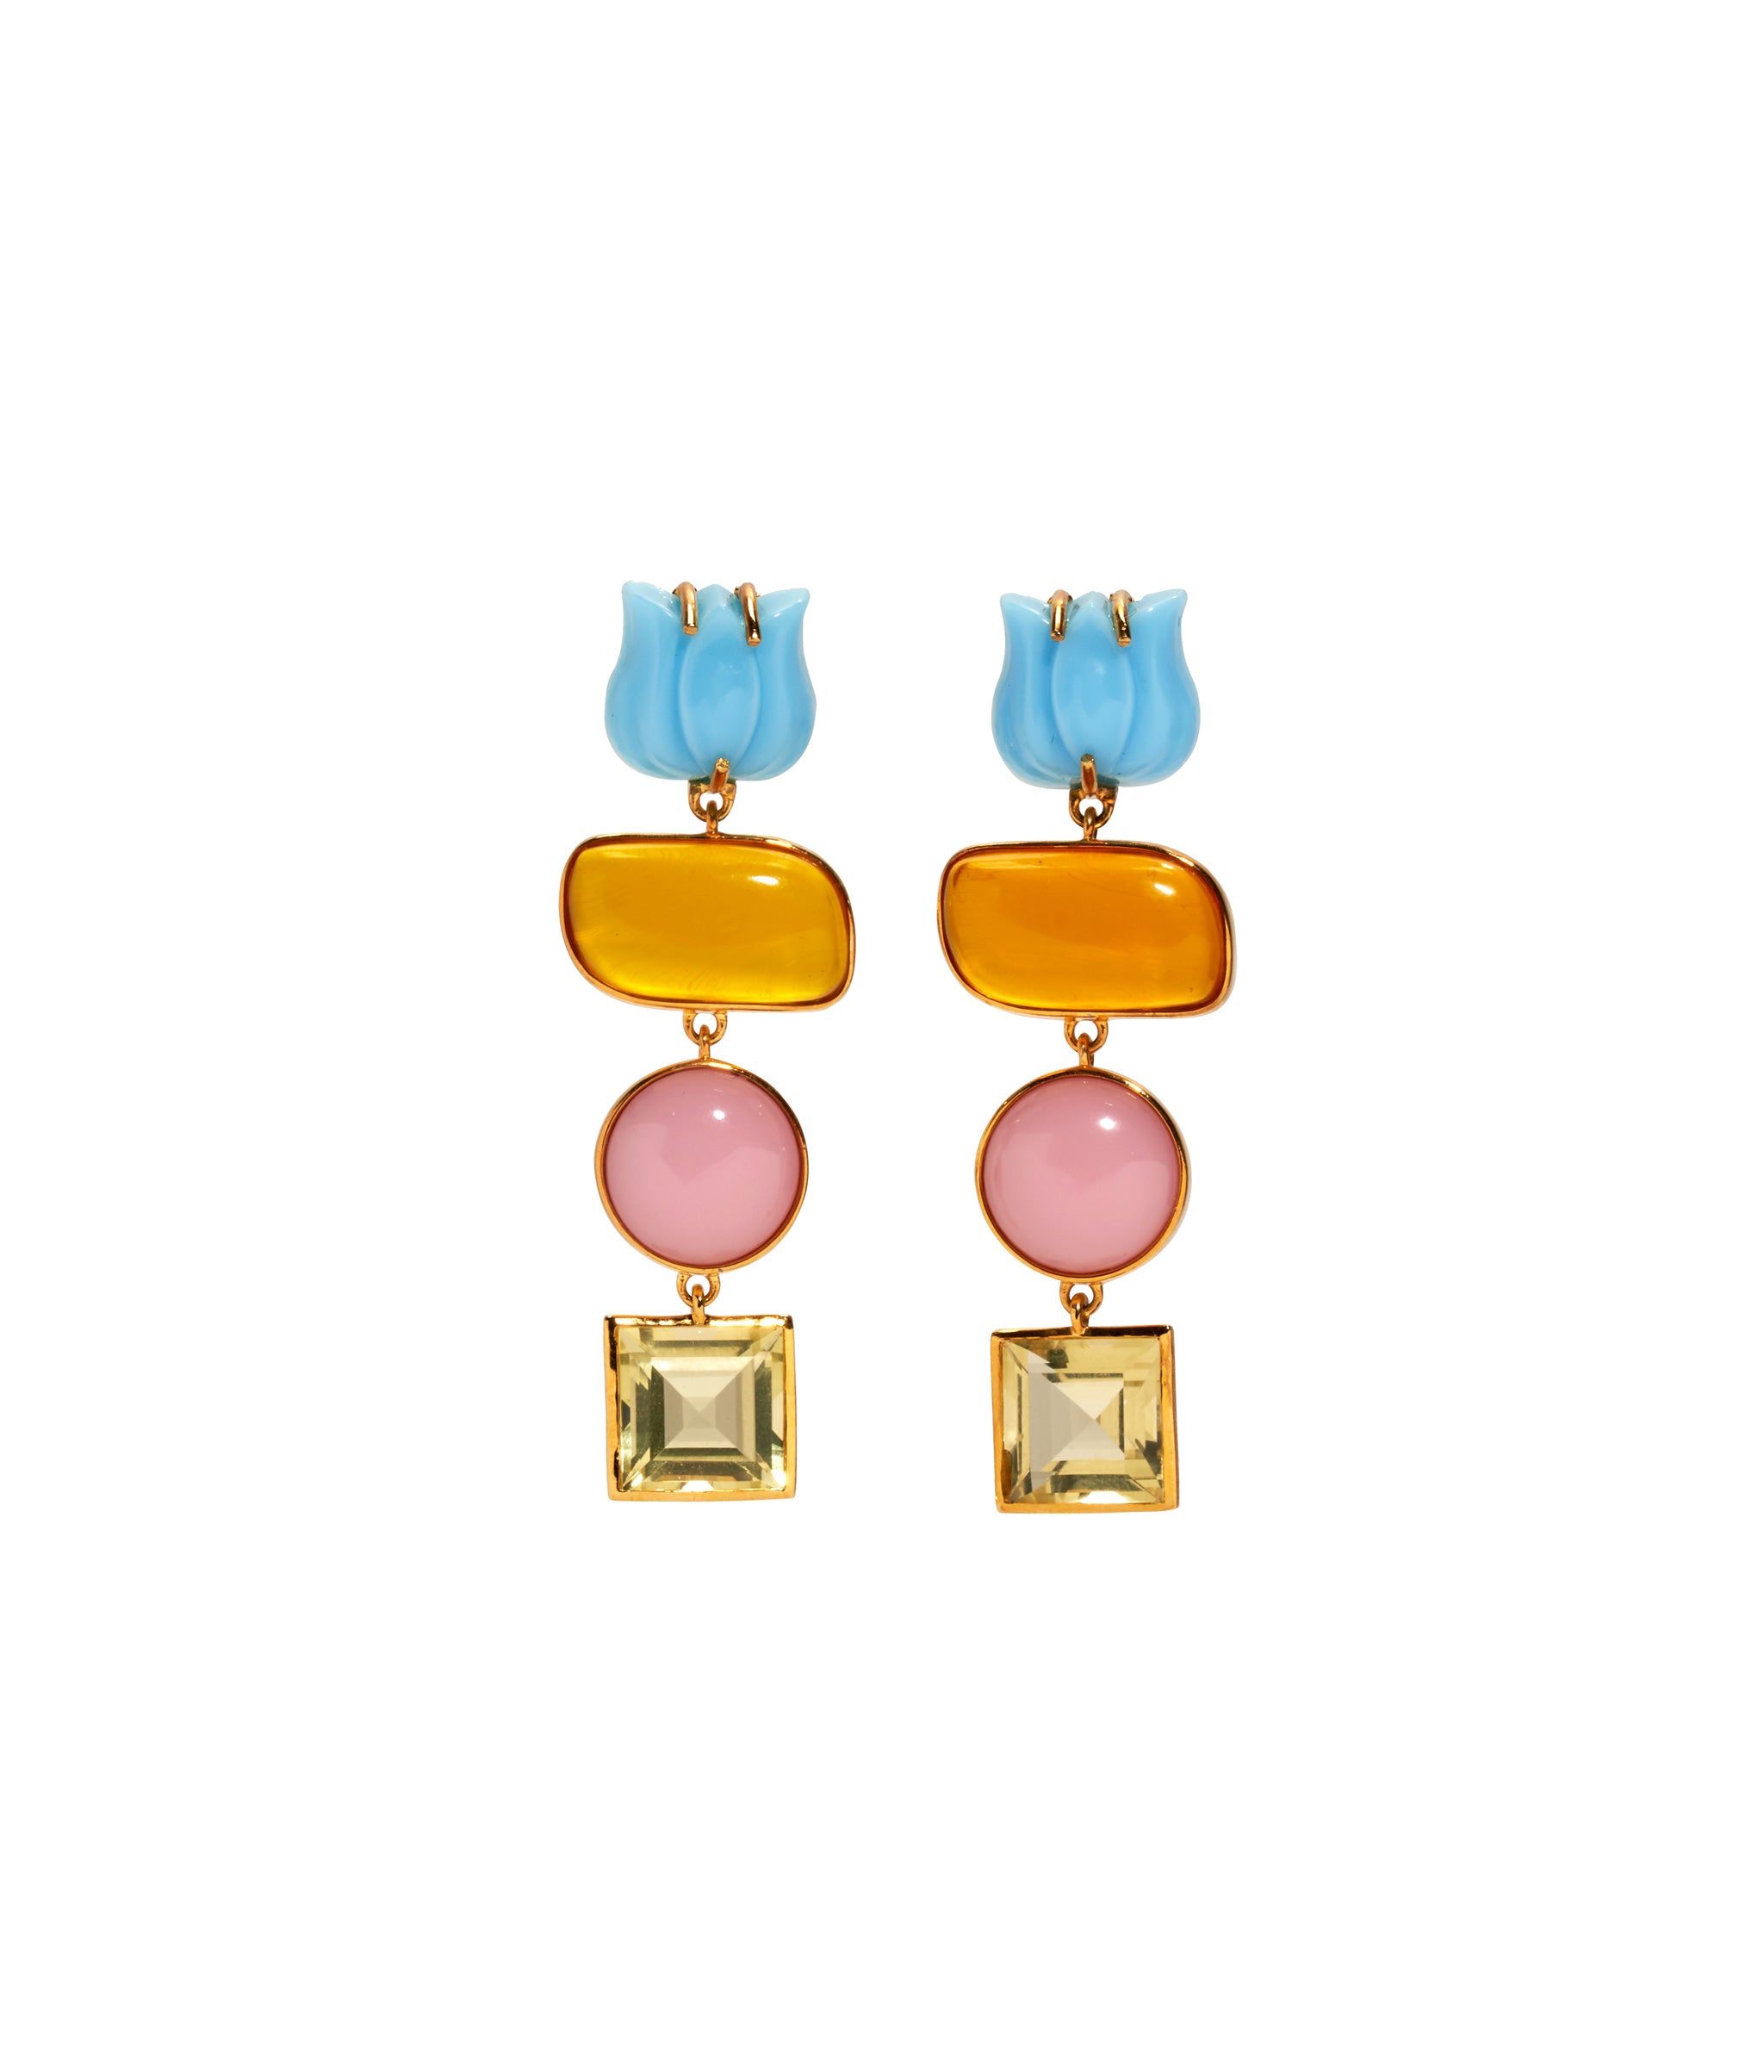 Tropical Tulip Earrings. Blue vintage glass tulip tops and hanging amber, pink quartz, and faceted lemon quartz stones.